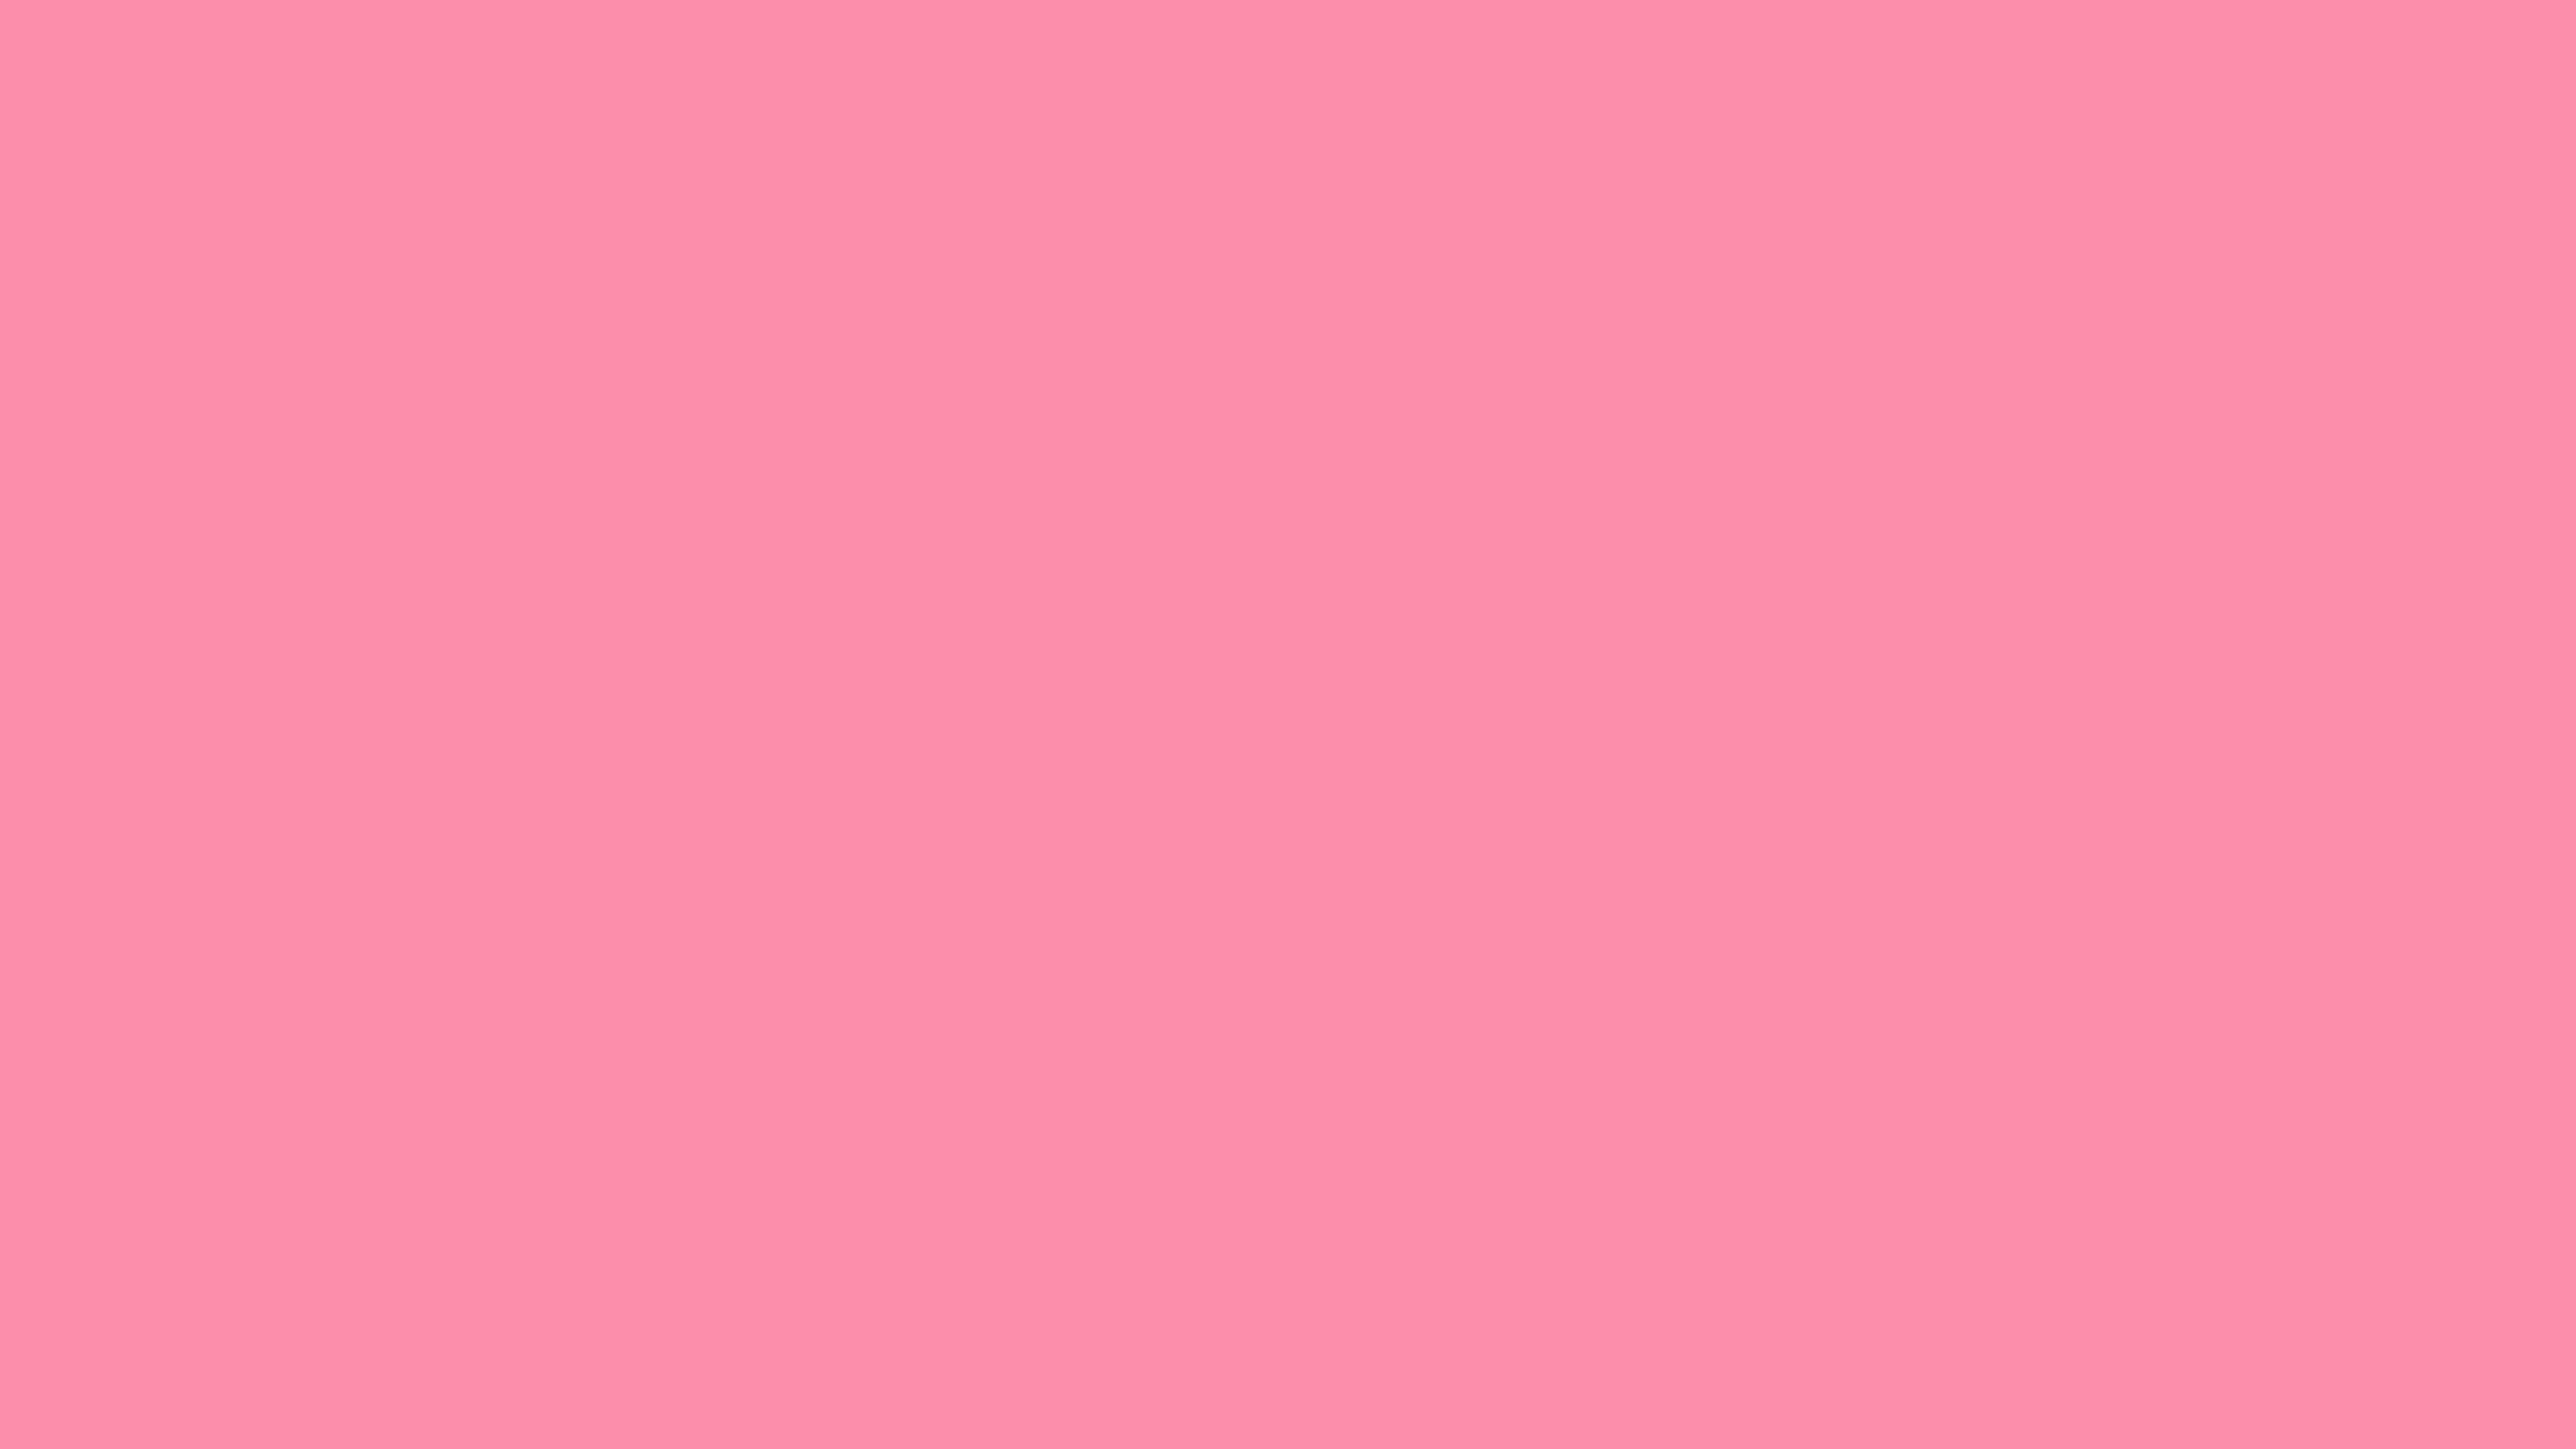 3840x2160 Flamingo Pink Solid Color Background